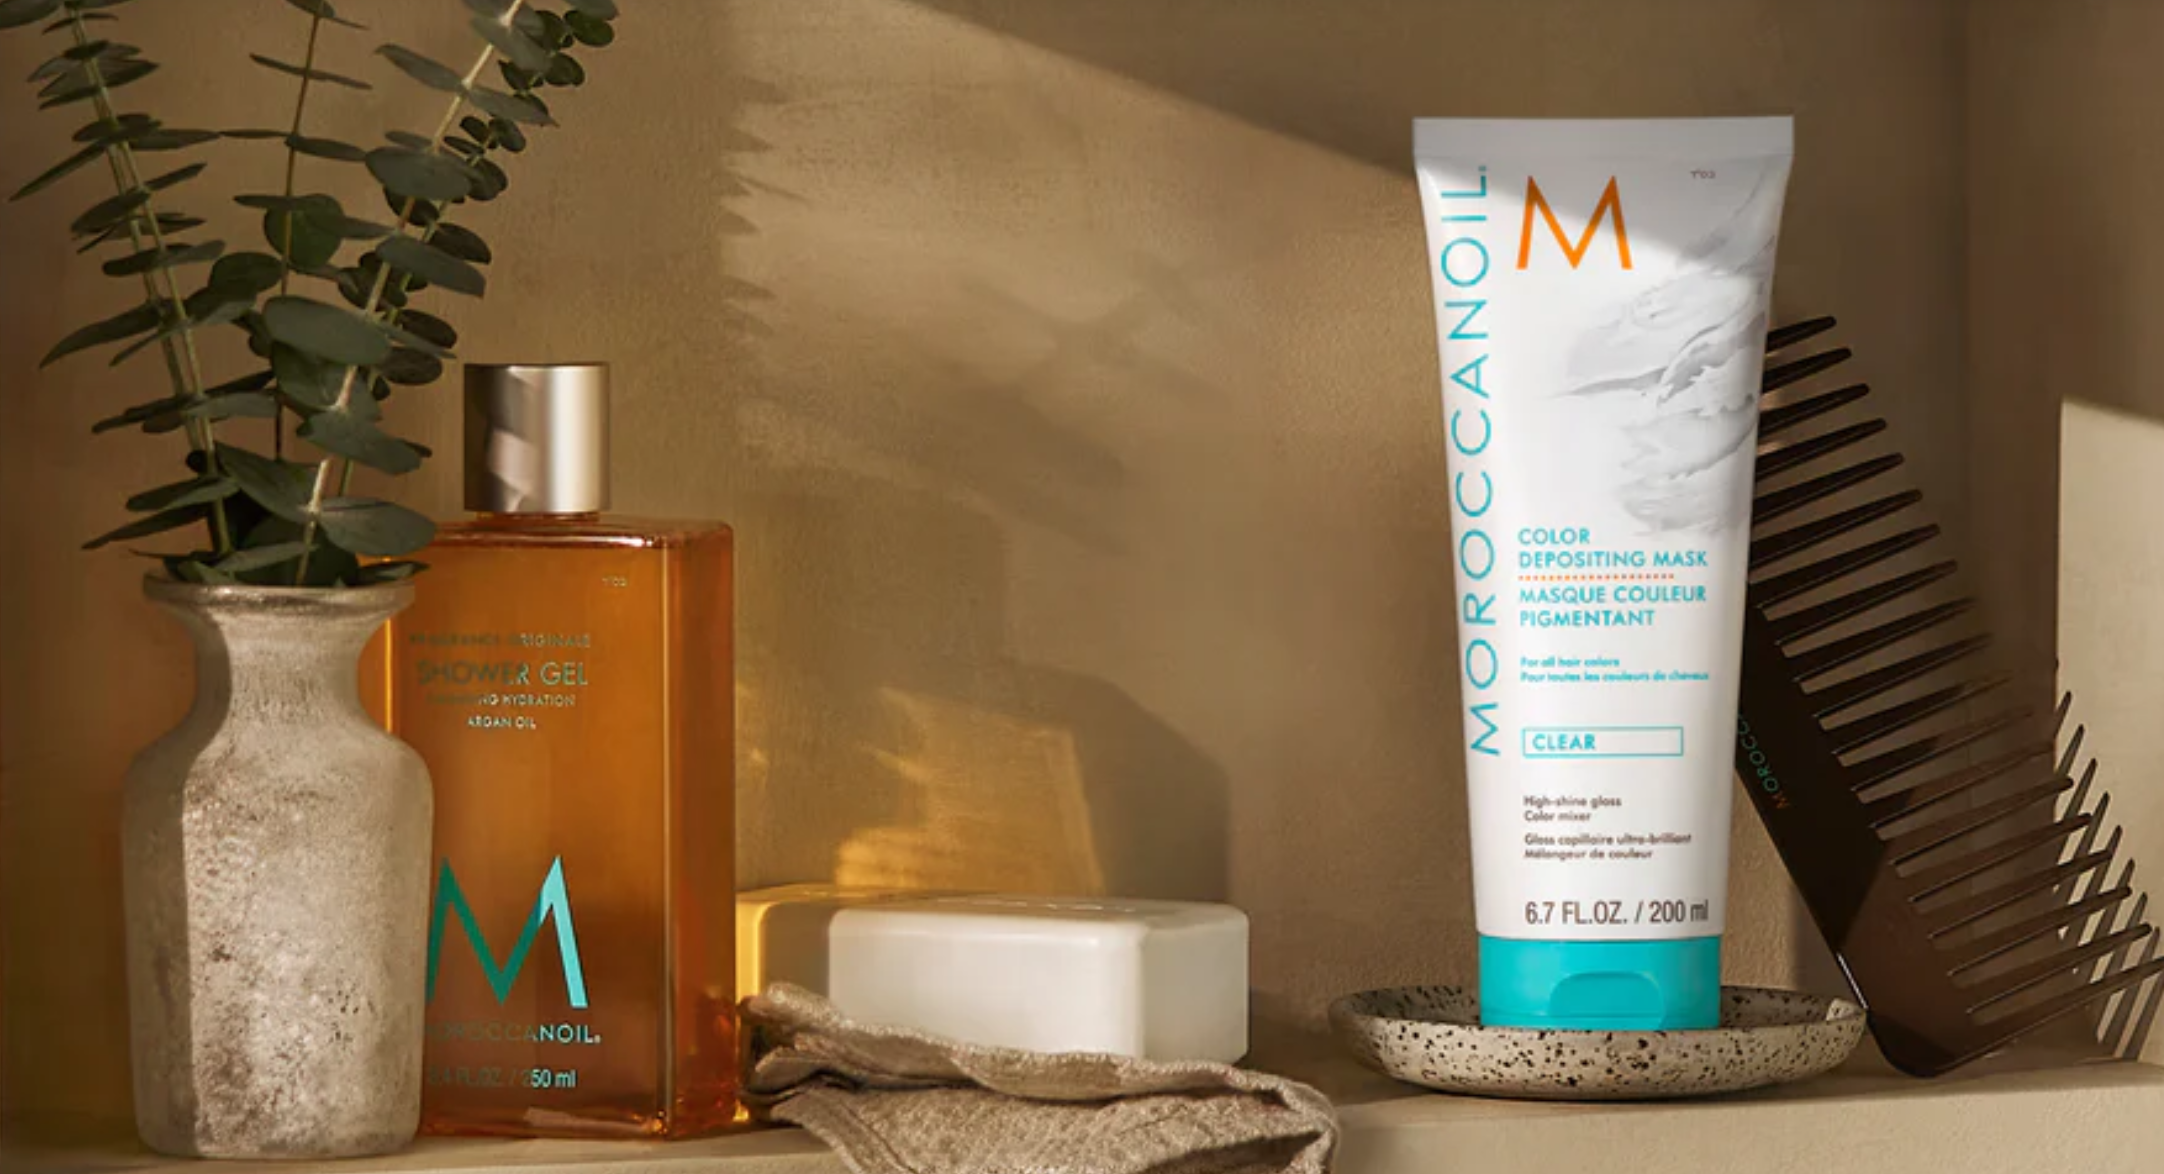 Moroccan Oil Hair Care products